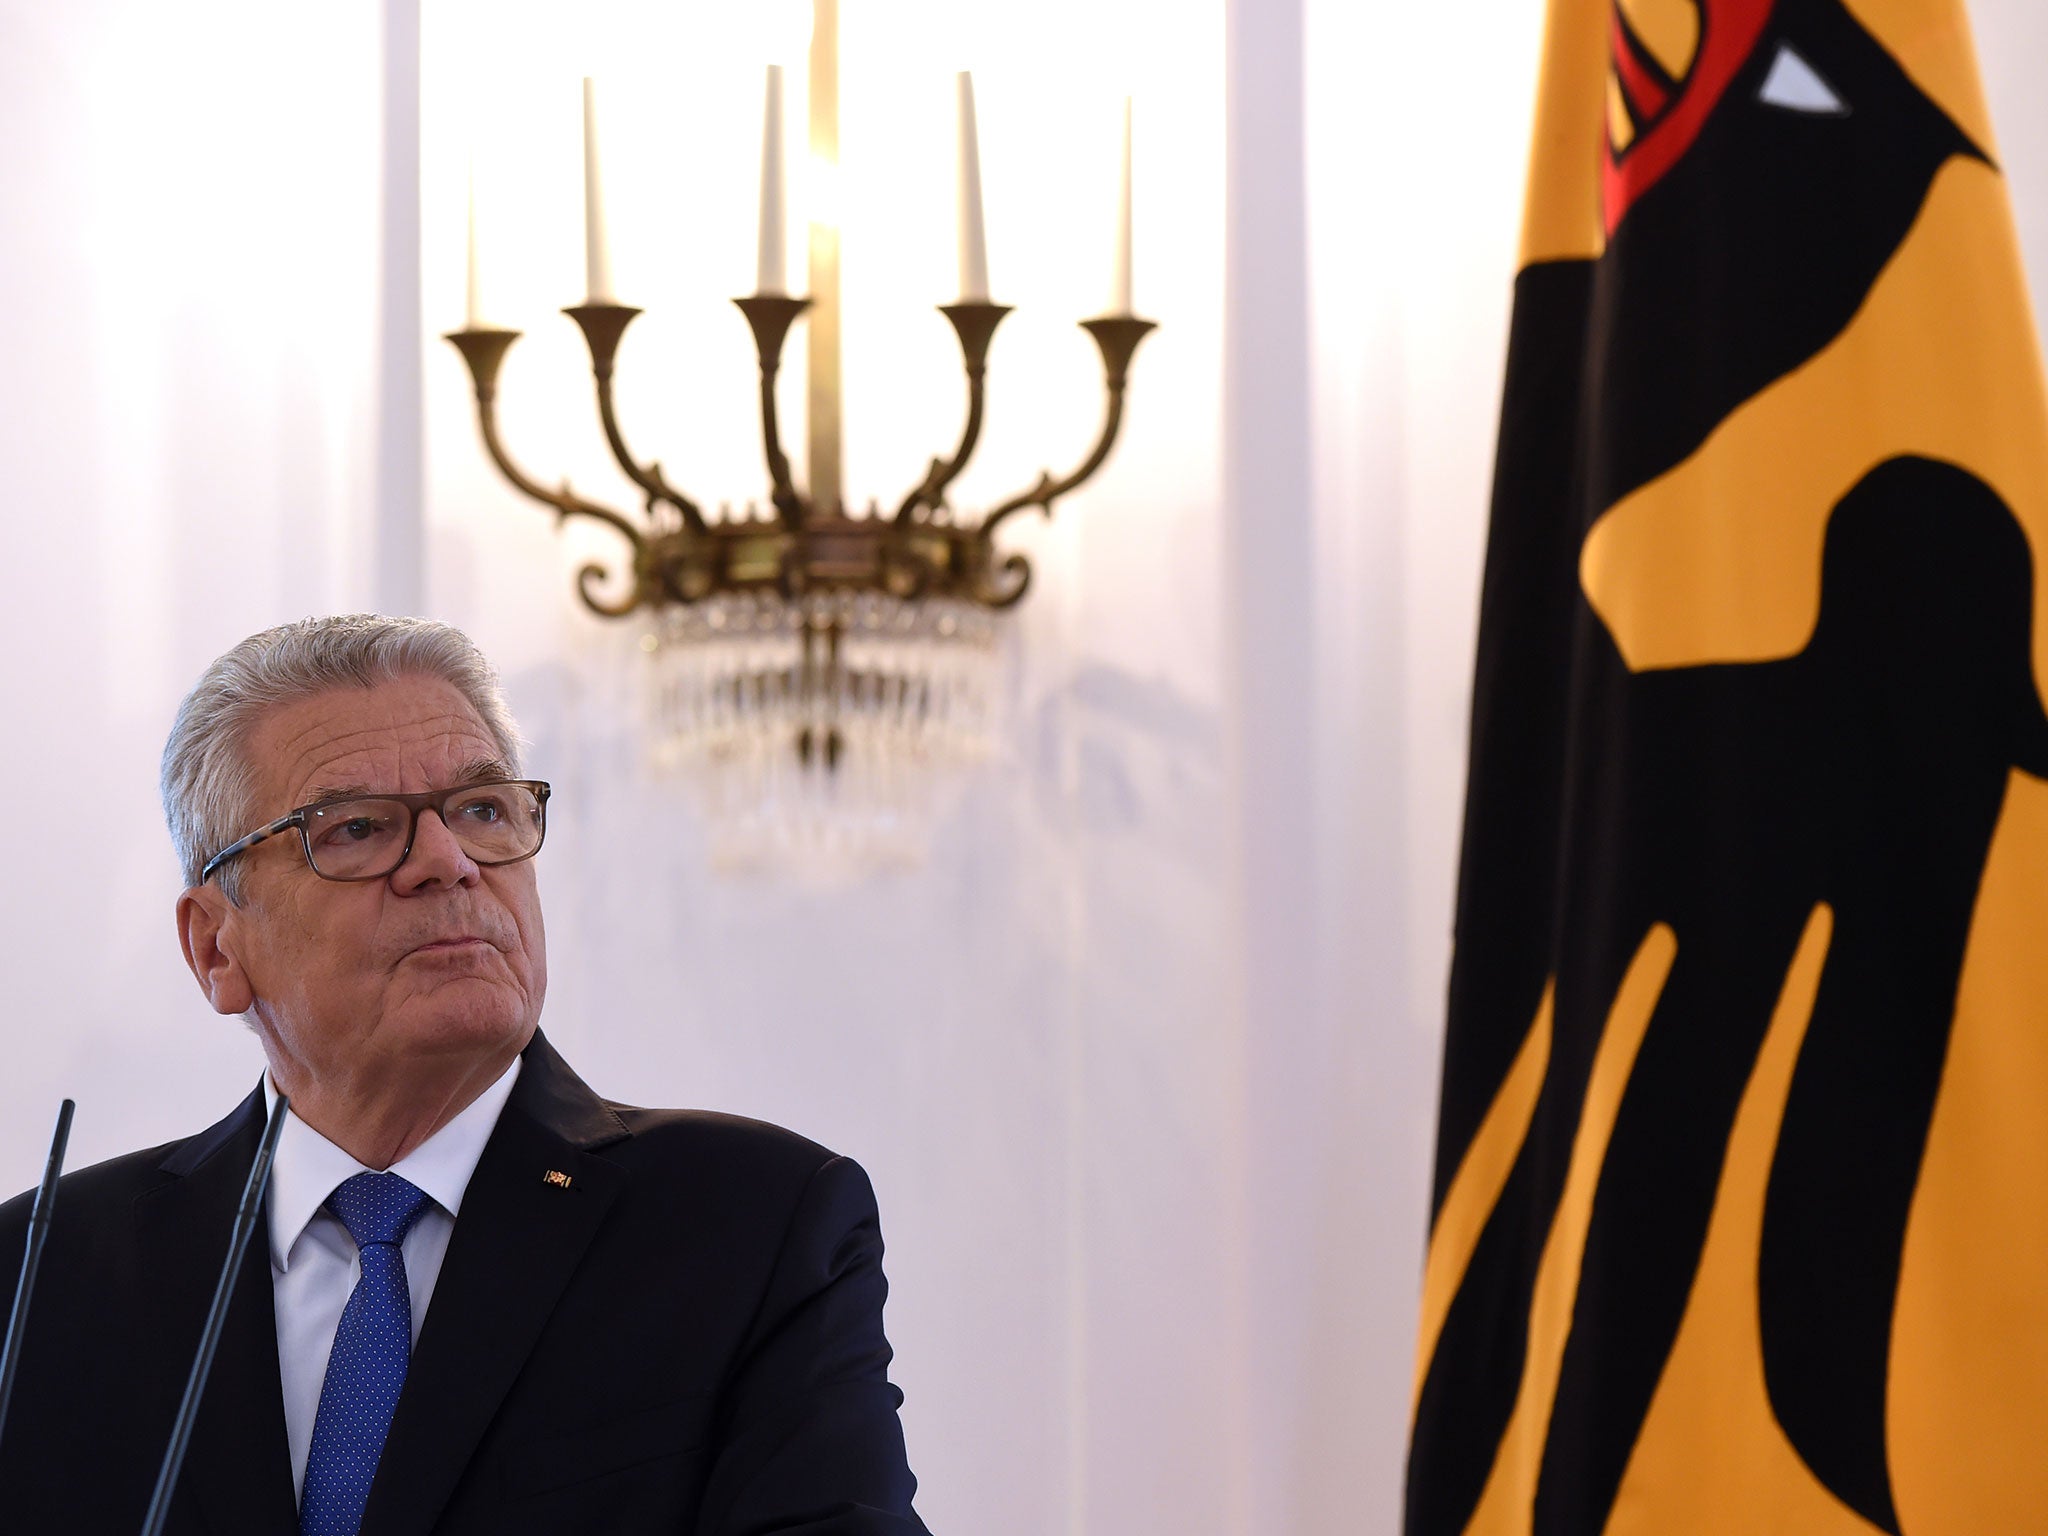 German Federal President Joachim Gauck during his statement at the Bellevue palace in Berlin